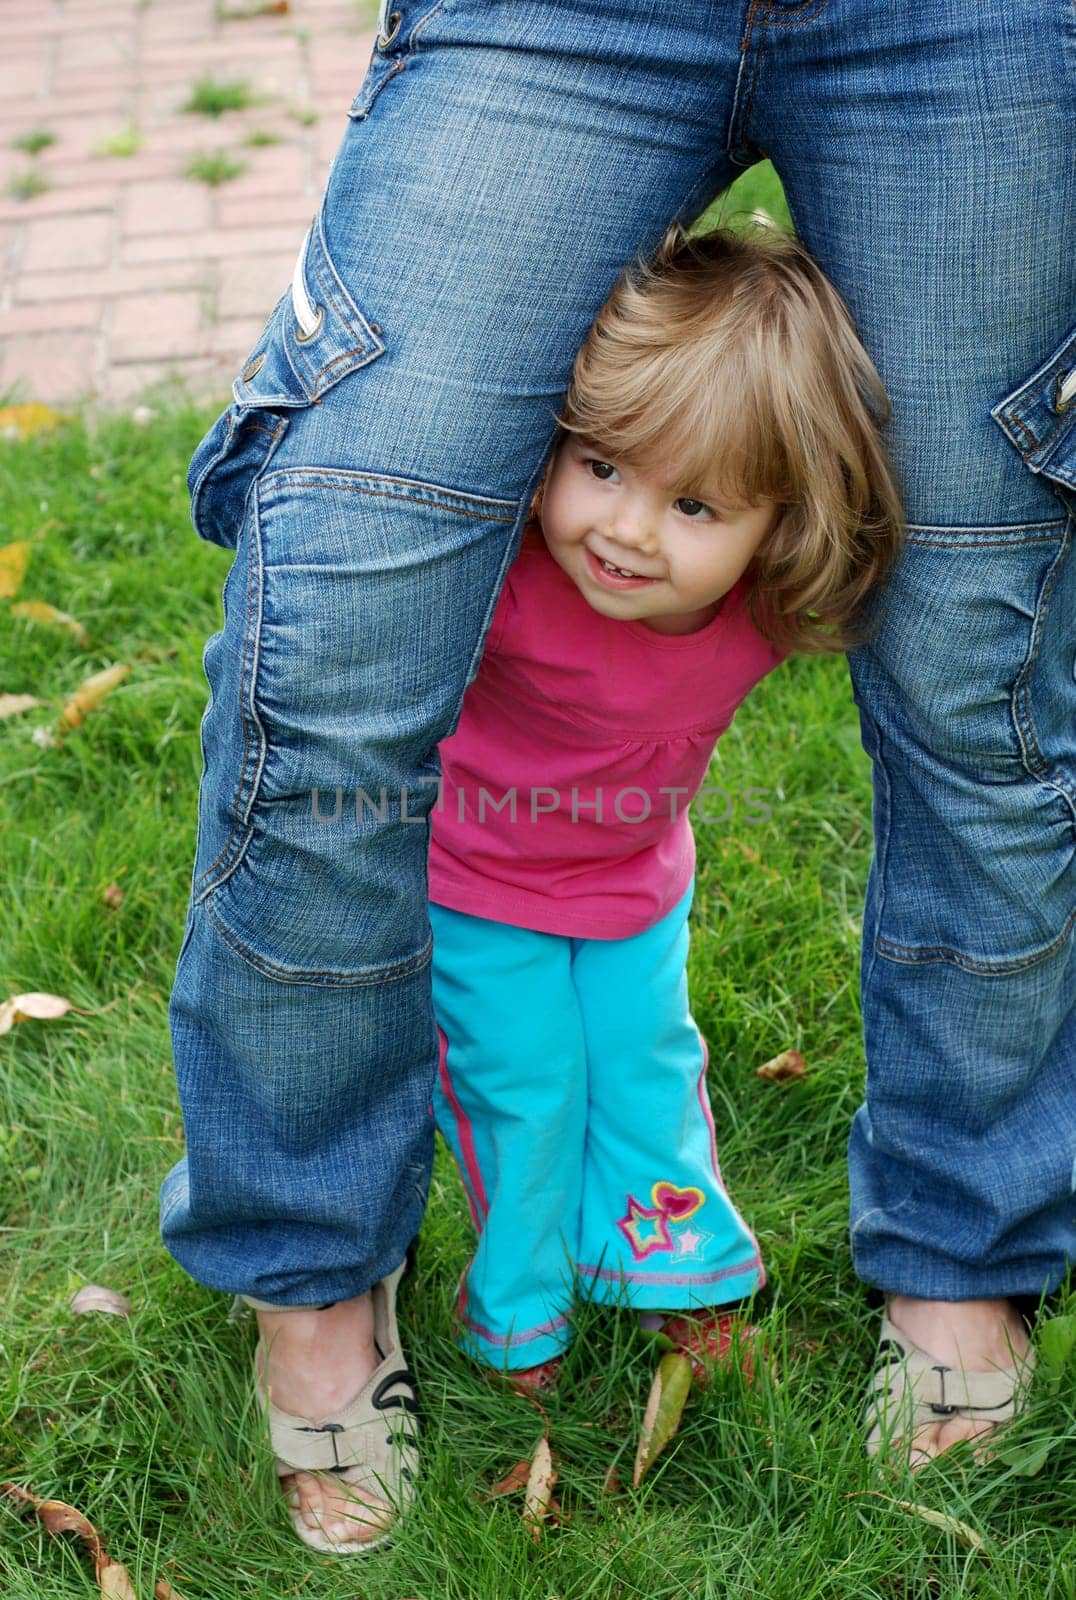 Childish shyness, timidity, insecurity. A defenseless child seeks support from a parent. Cute girl hiding behind her mom